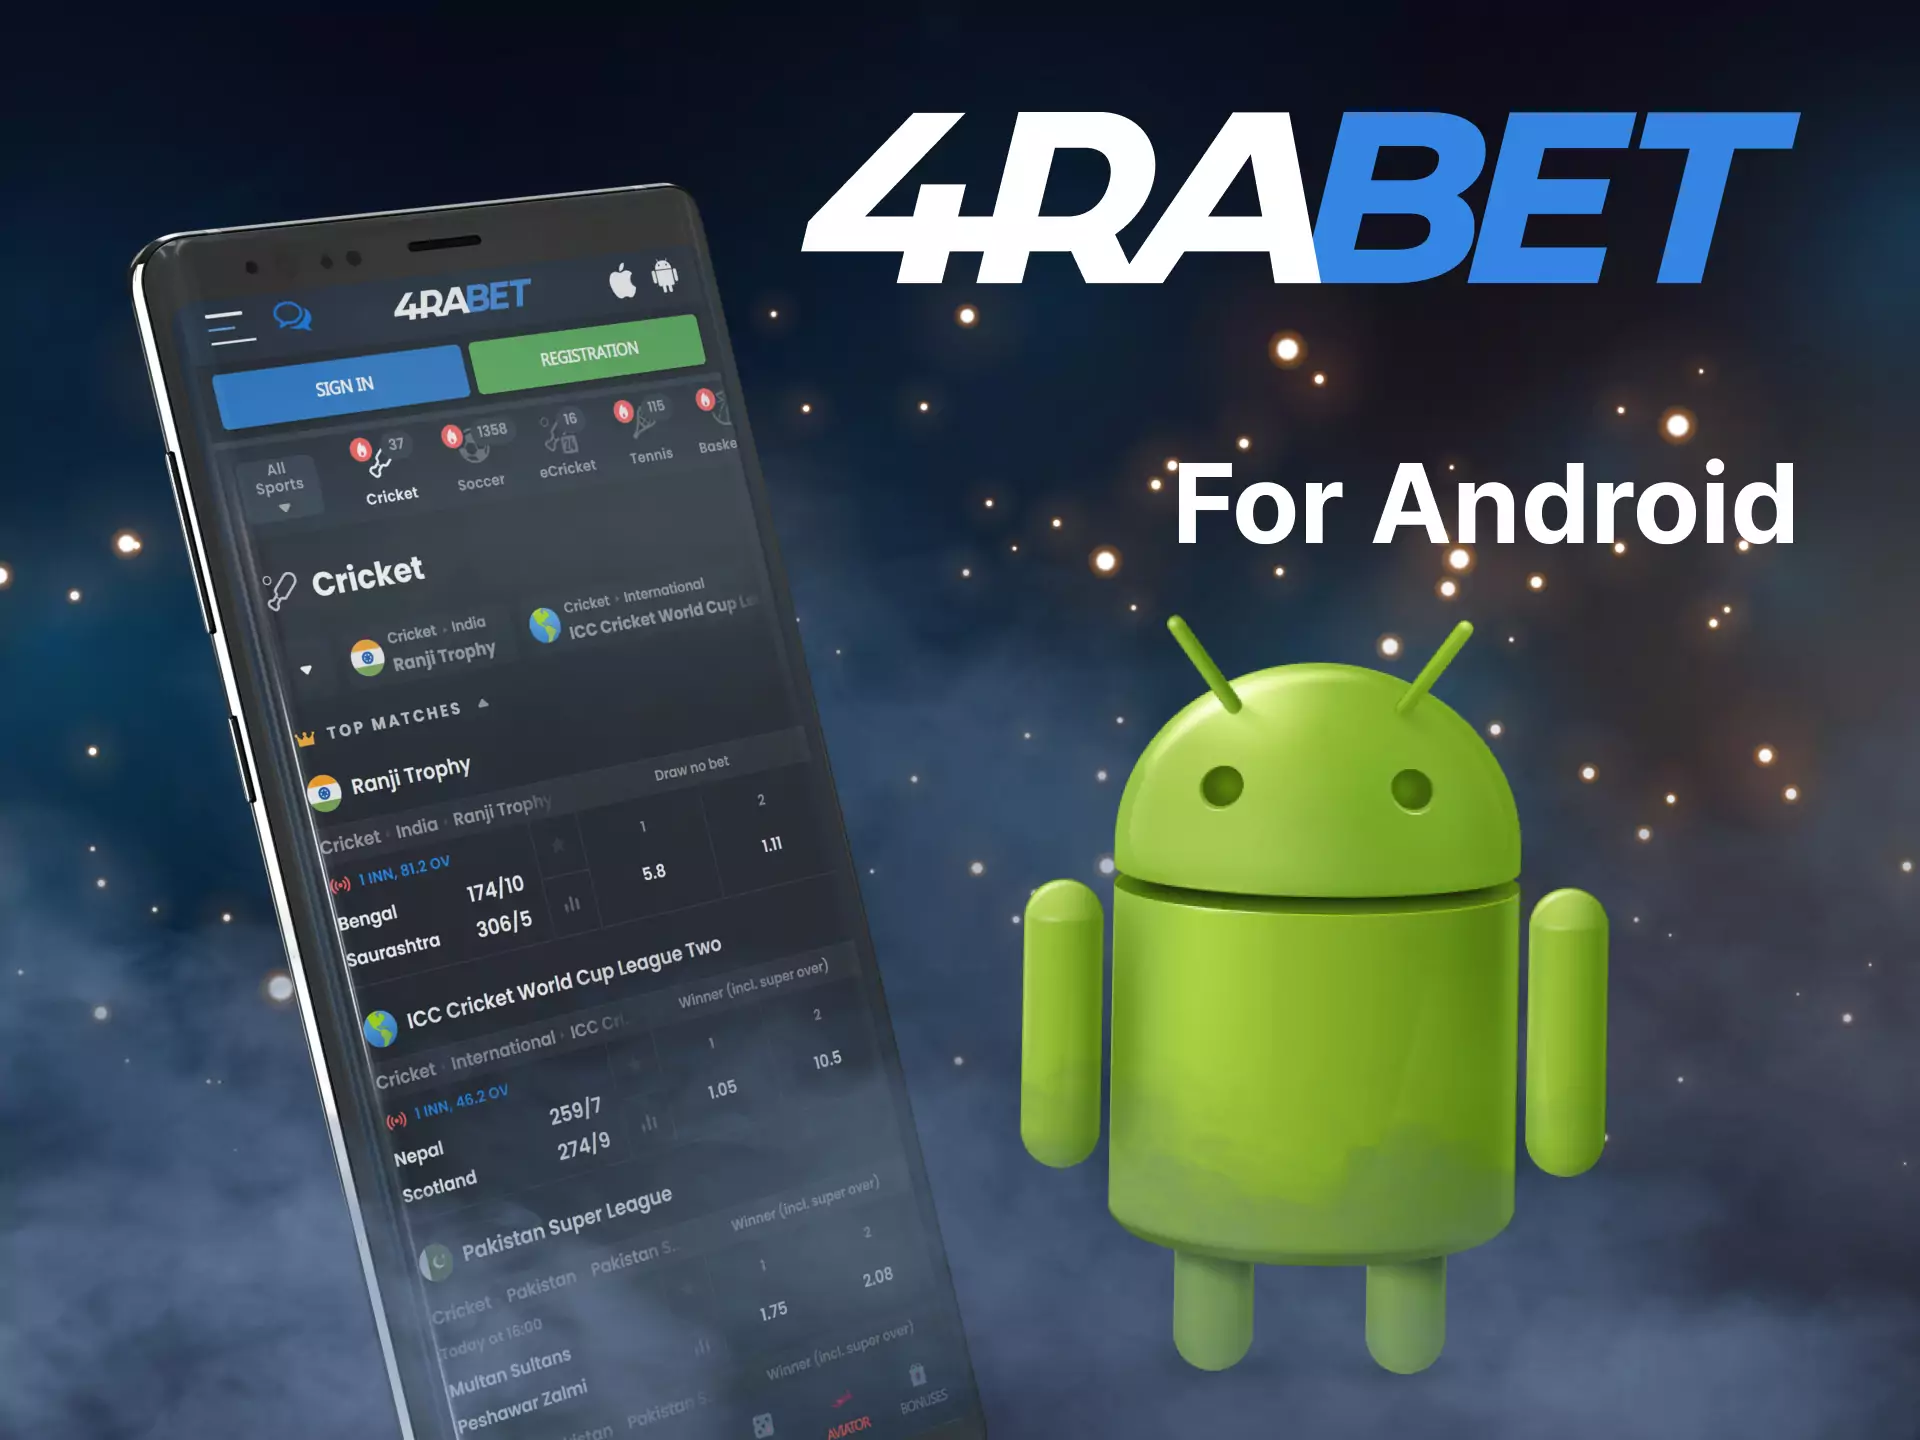 The 4rabet mobile app can be installed on your Android phone.